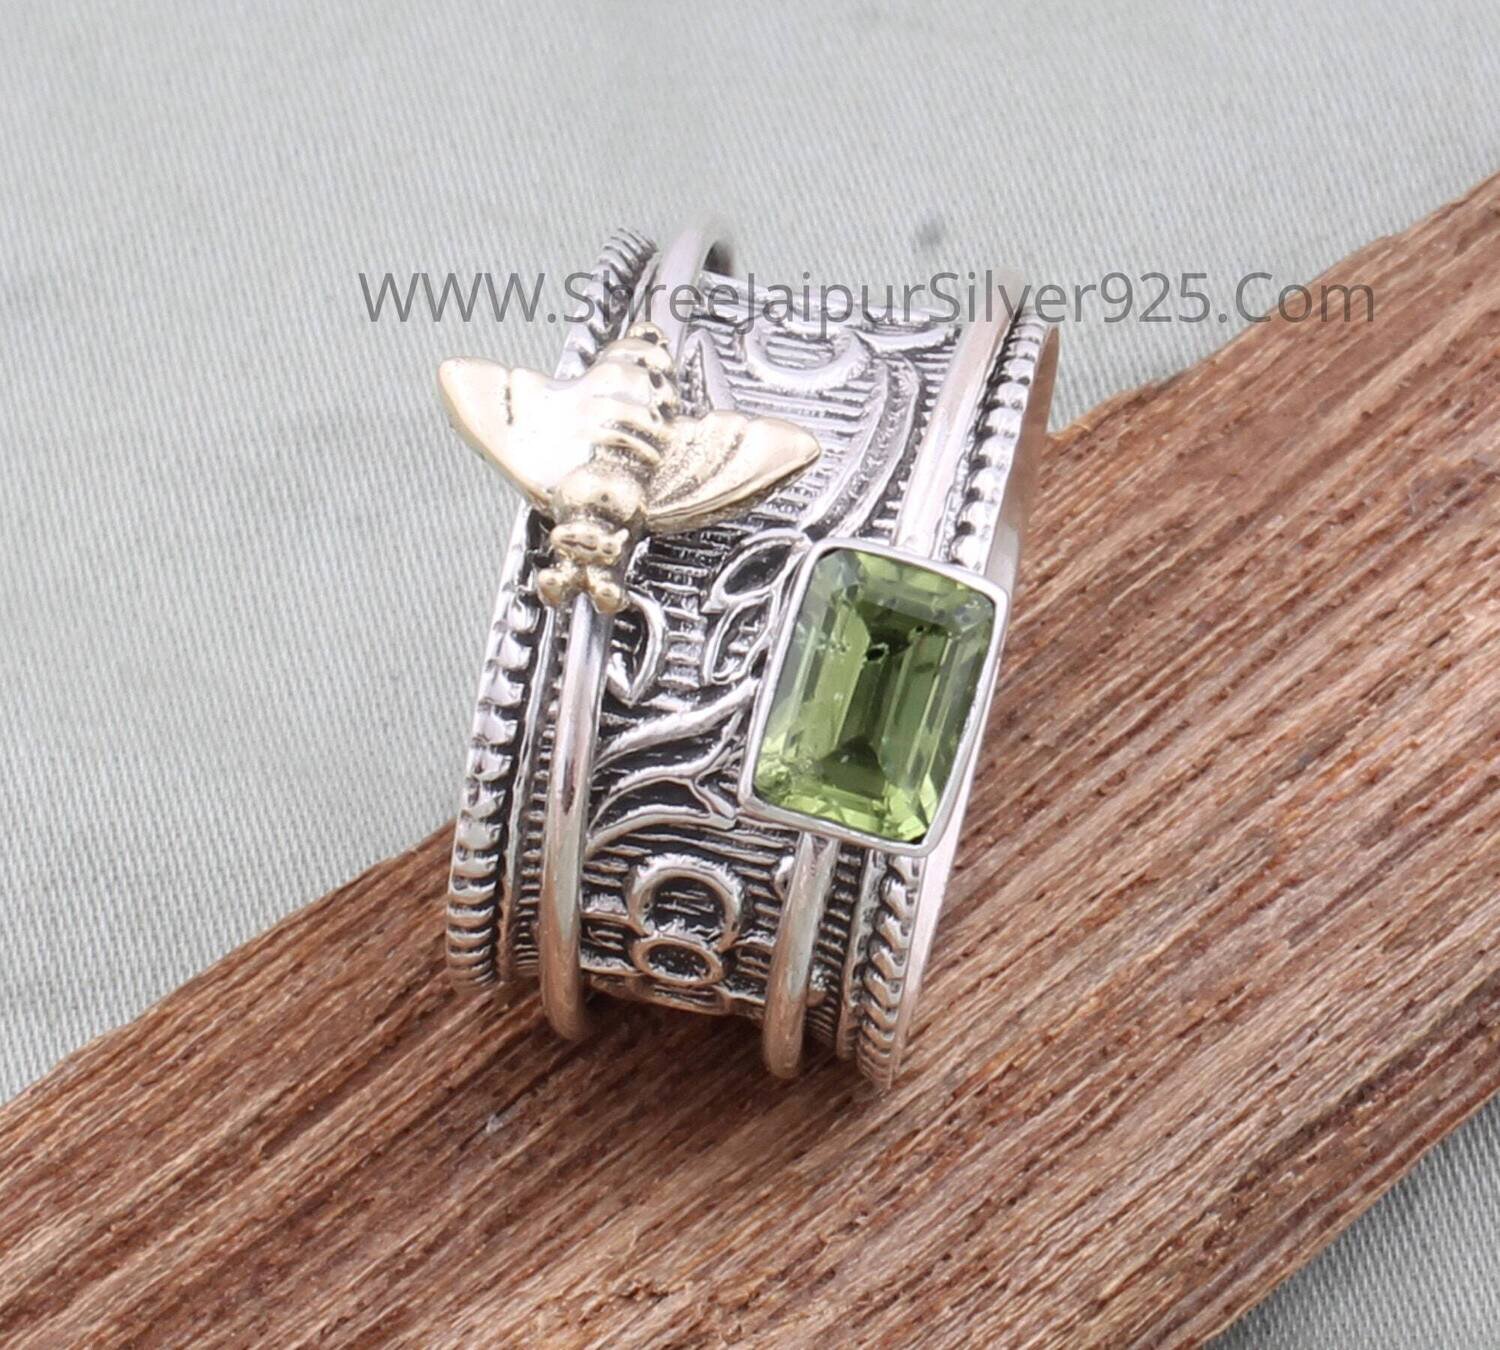 925 Sterling Silver & Brass Peridot Spinner Ring, Handmade Honey Bee Engraved Wide Band Fidget Anxiety Ring Gifts For Her Anniversary Gift